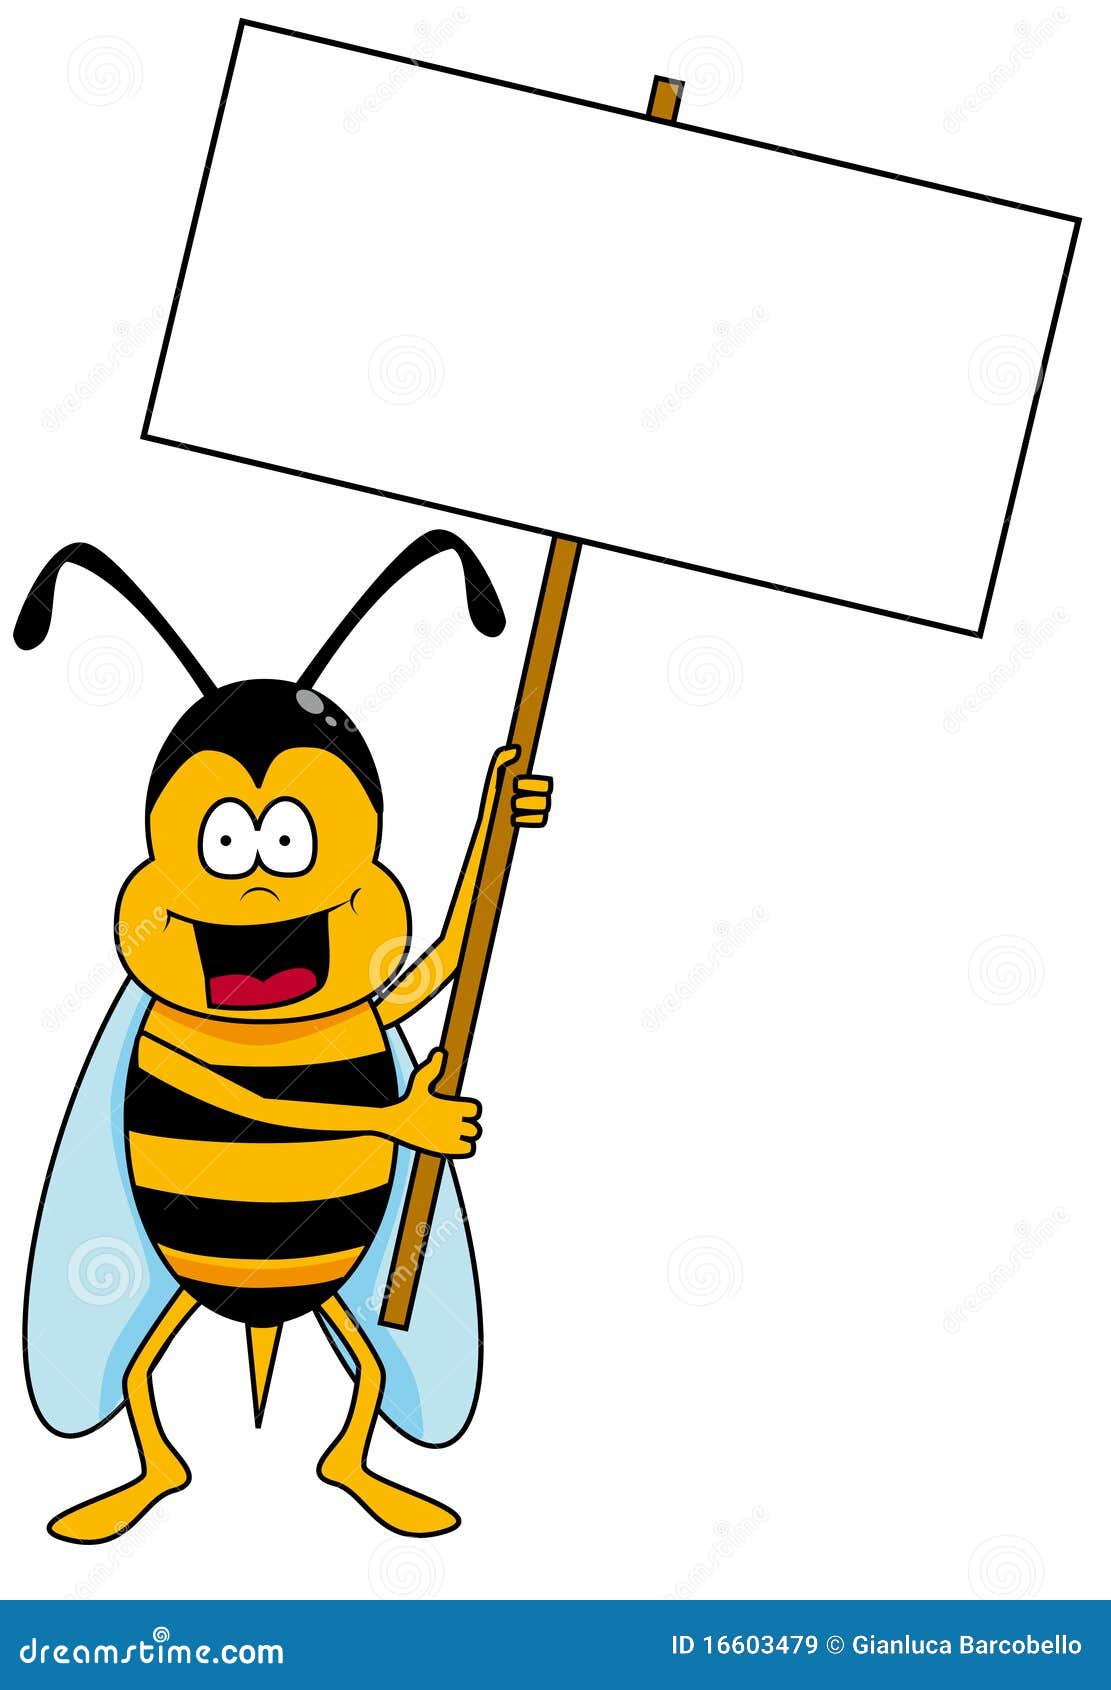 bee book clipart - photo #48